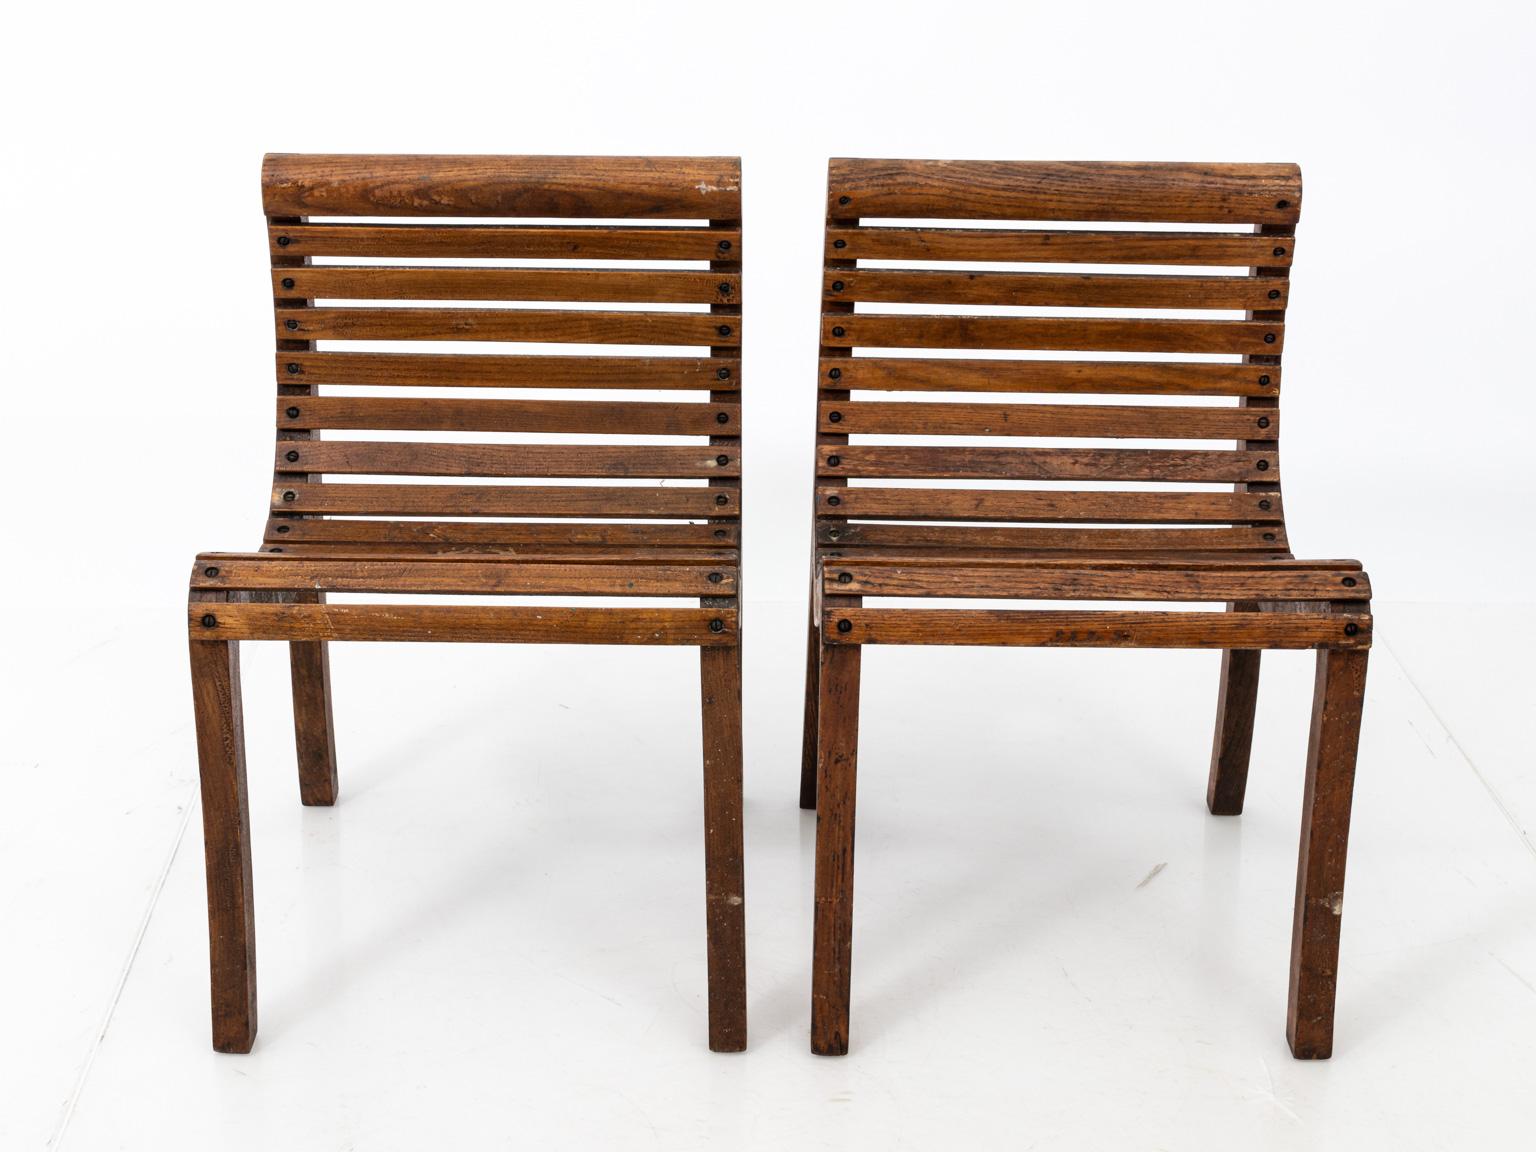 Pair of lolling oak chairs. Please note of wear consistent with age including finish loss and scratches, circa 20th century. There is also a maker's plaque that reads 